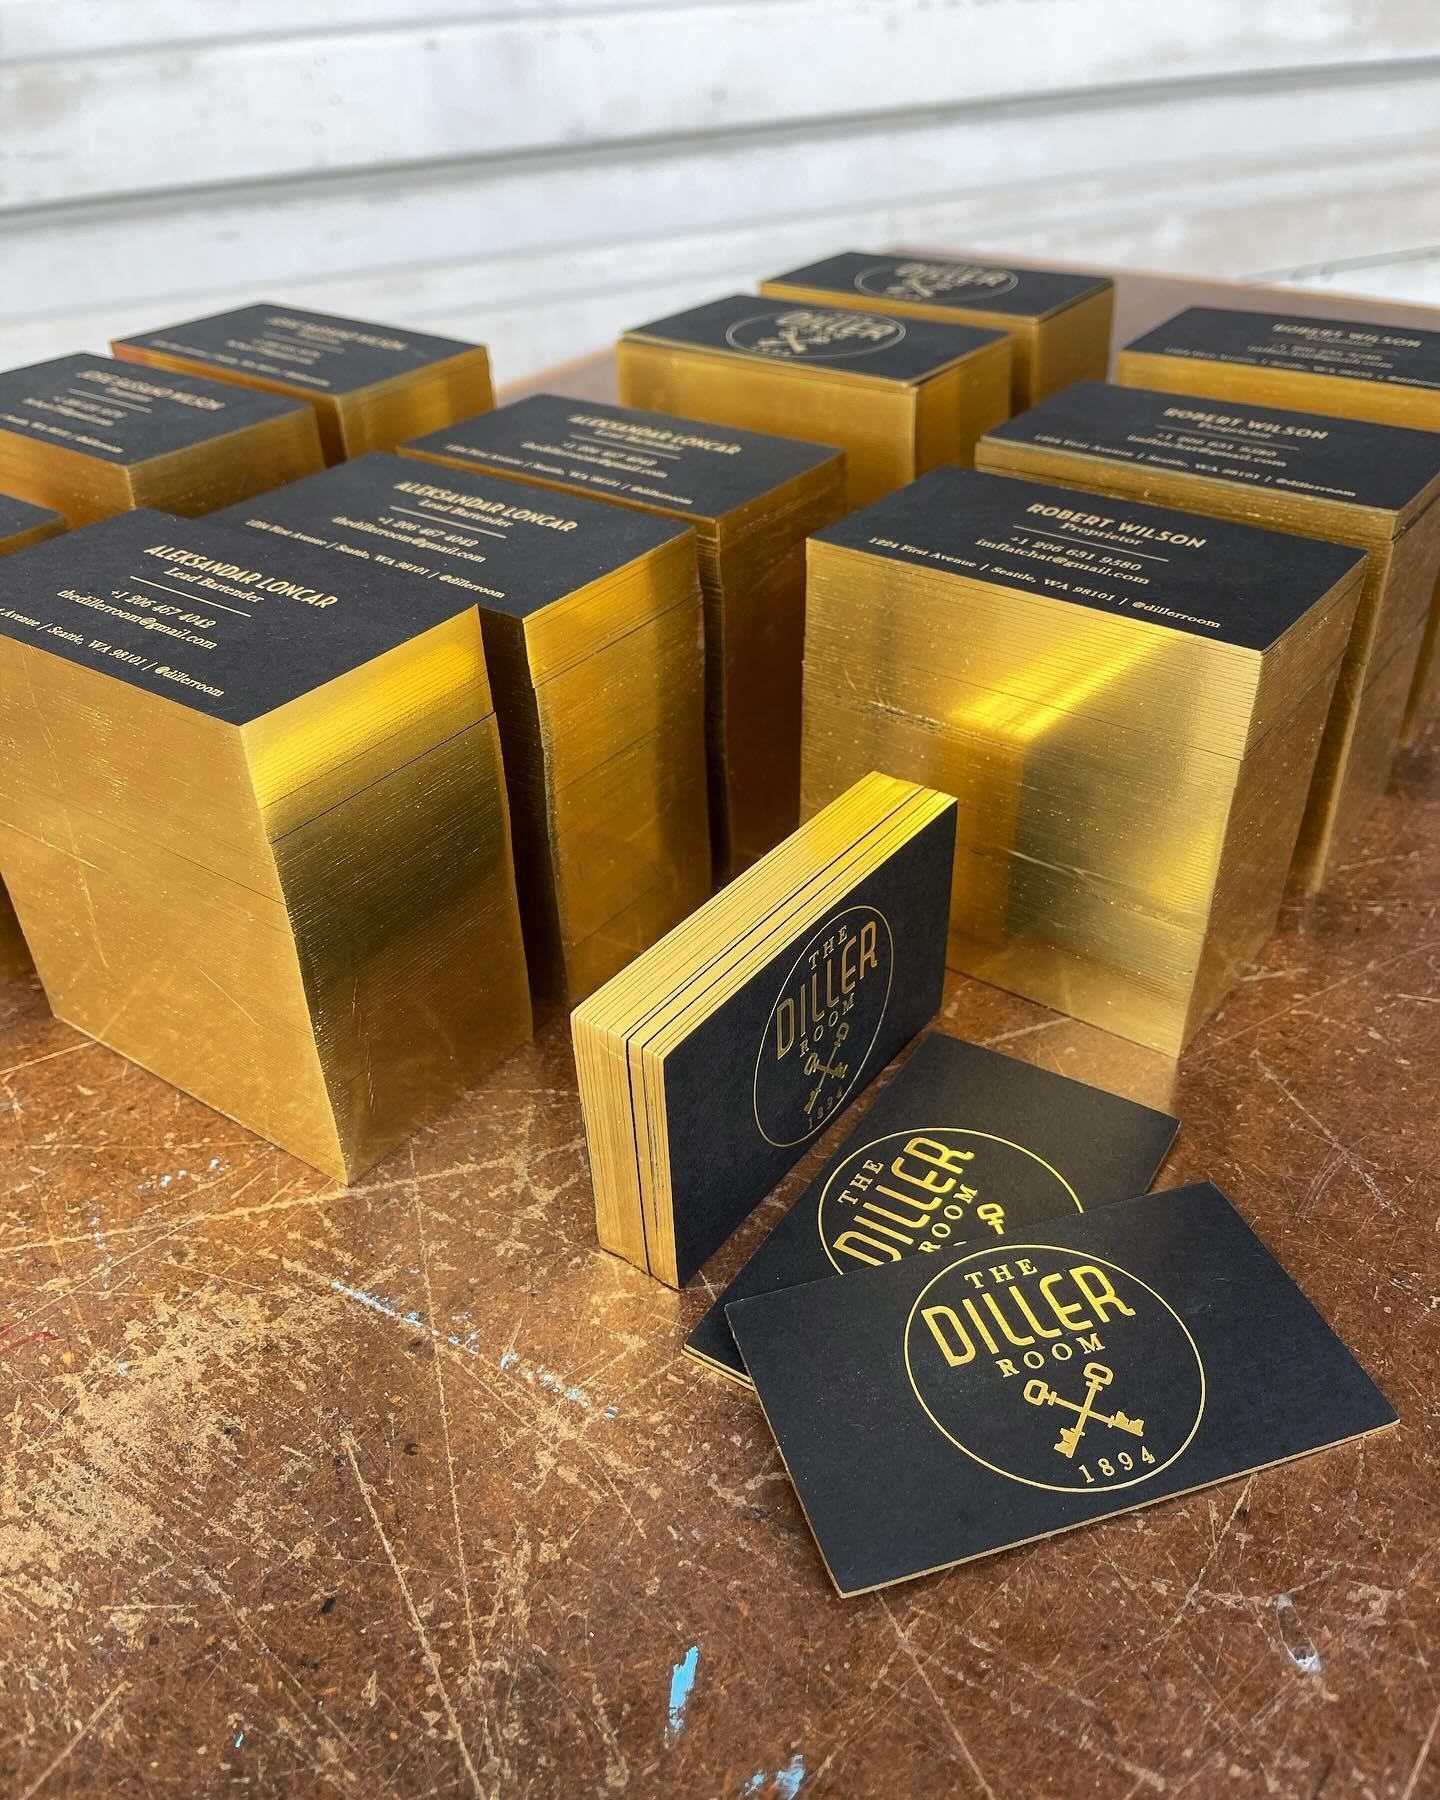 We are happy to announce that we now offer edge-gilding as an in-house service! So now you have to ask yourself; Do you have a business card quite as swanky as @dillerroom does?
Printed on 260# @gfsmithpapers colorplan stock.
.
.
.
#edgegilding #gold